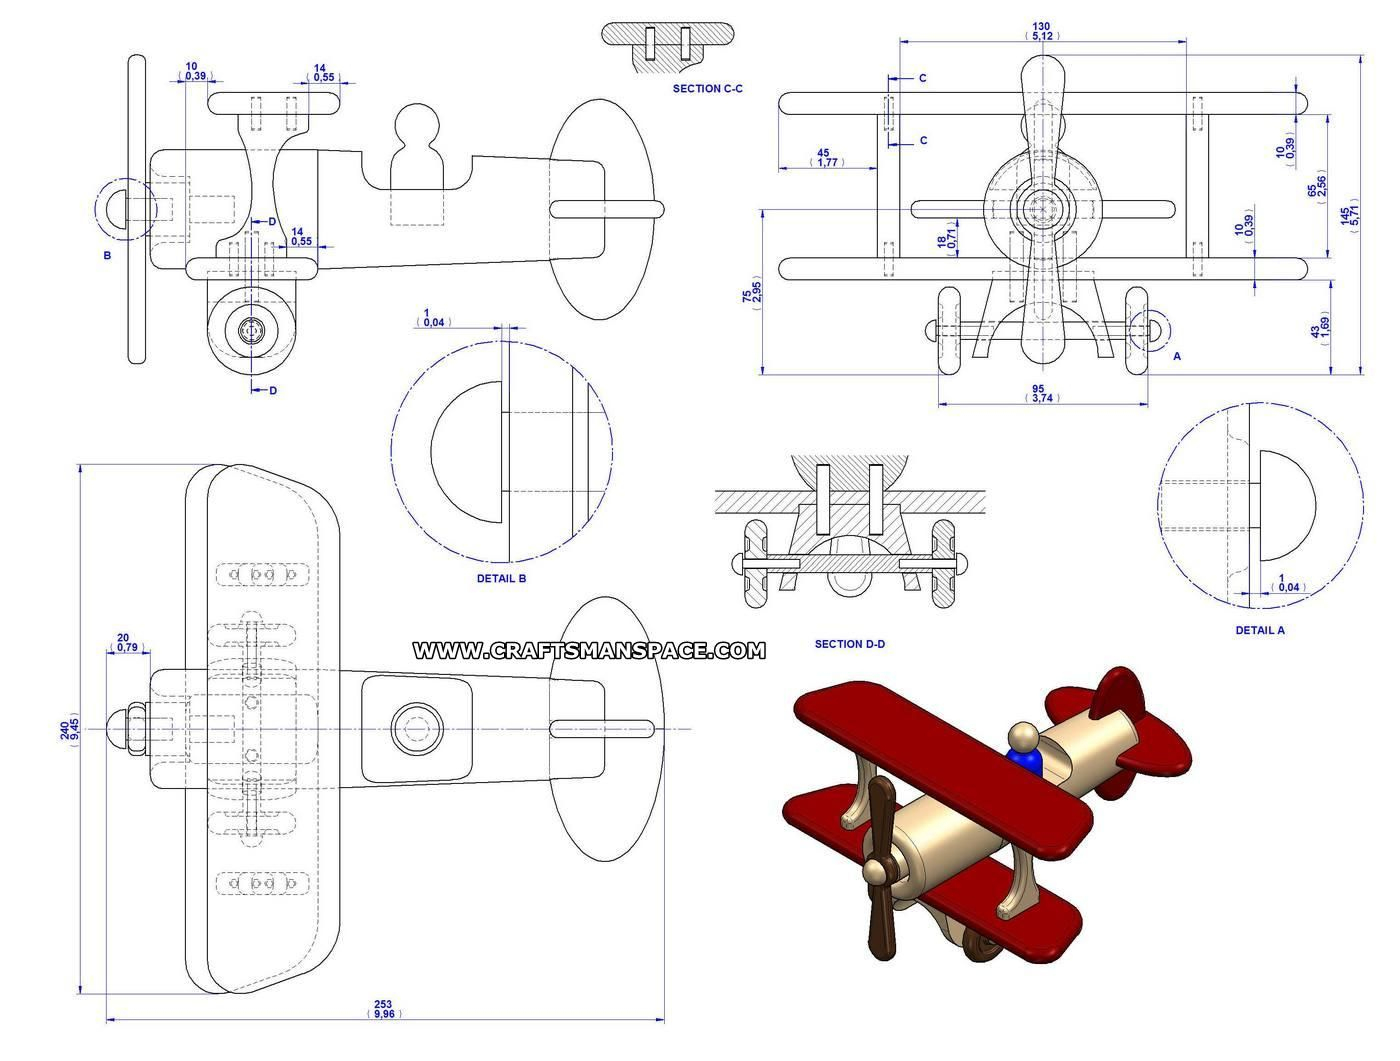 Wooden Toy Plans Free Pdf | Discover Woodworking Projects | Train - Free Wooden Toy Plans Printable